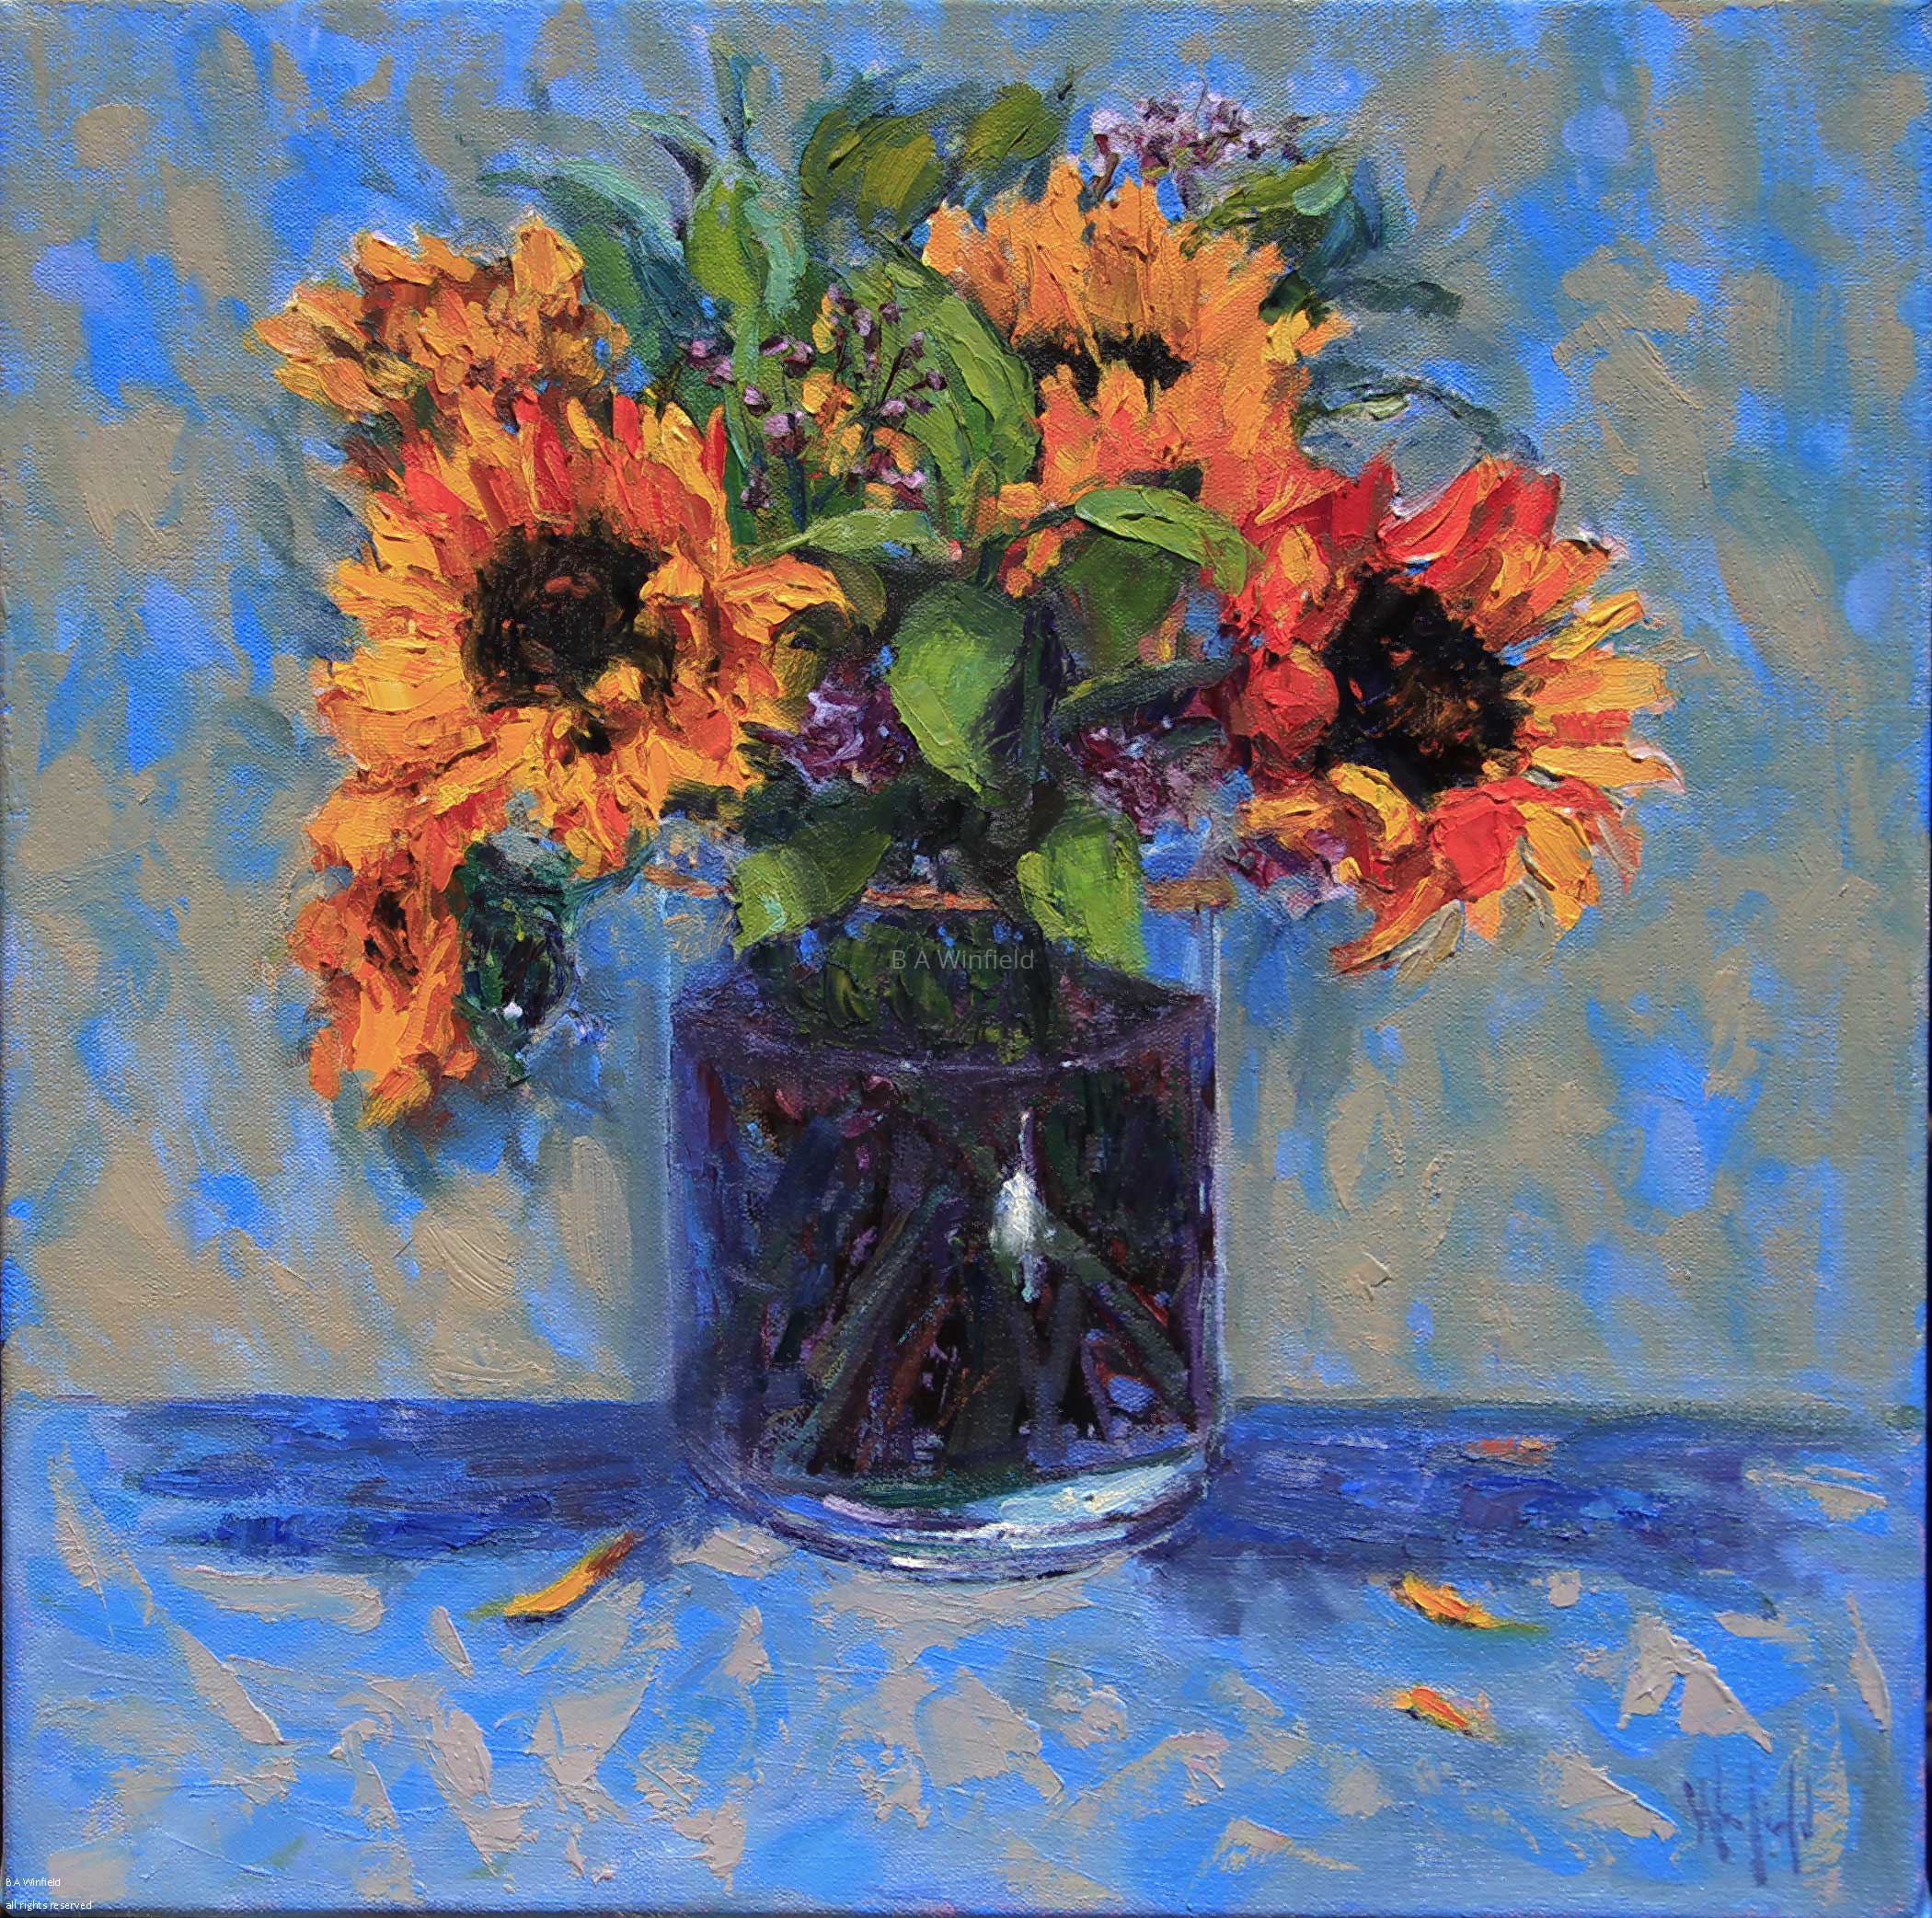 Beth Winfield, "Sunflower Happiness," oil, 16 x 16 in.